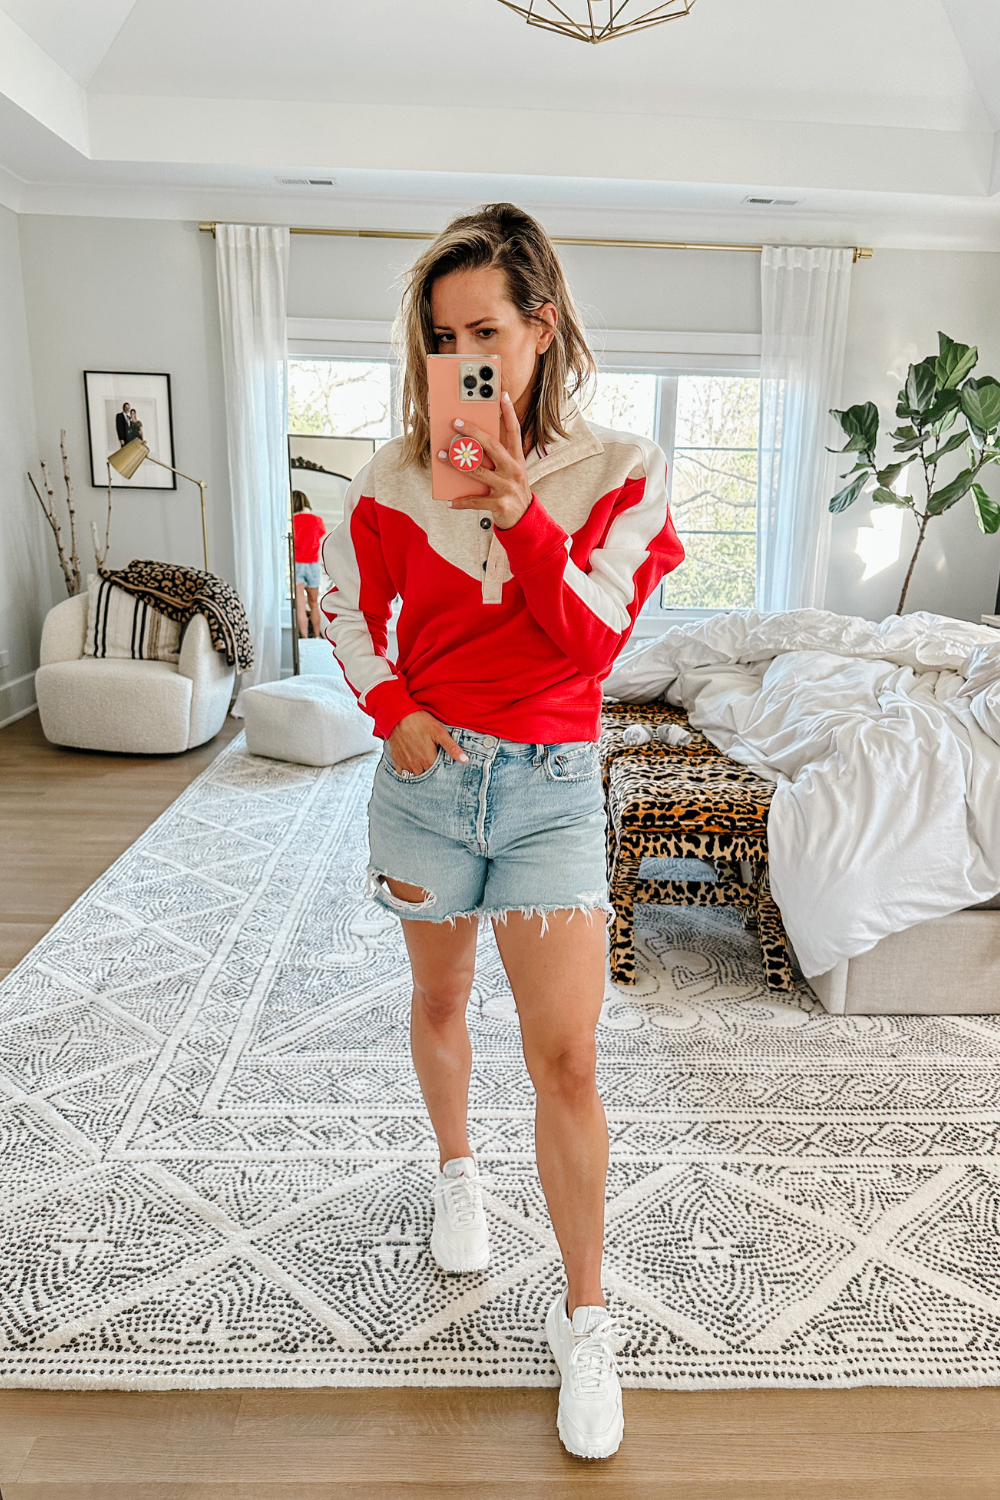 Suzanne wearing a color block pullover and denim shorts